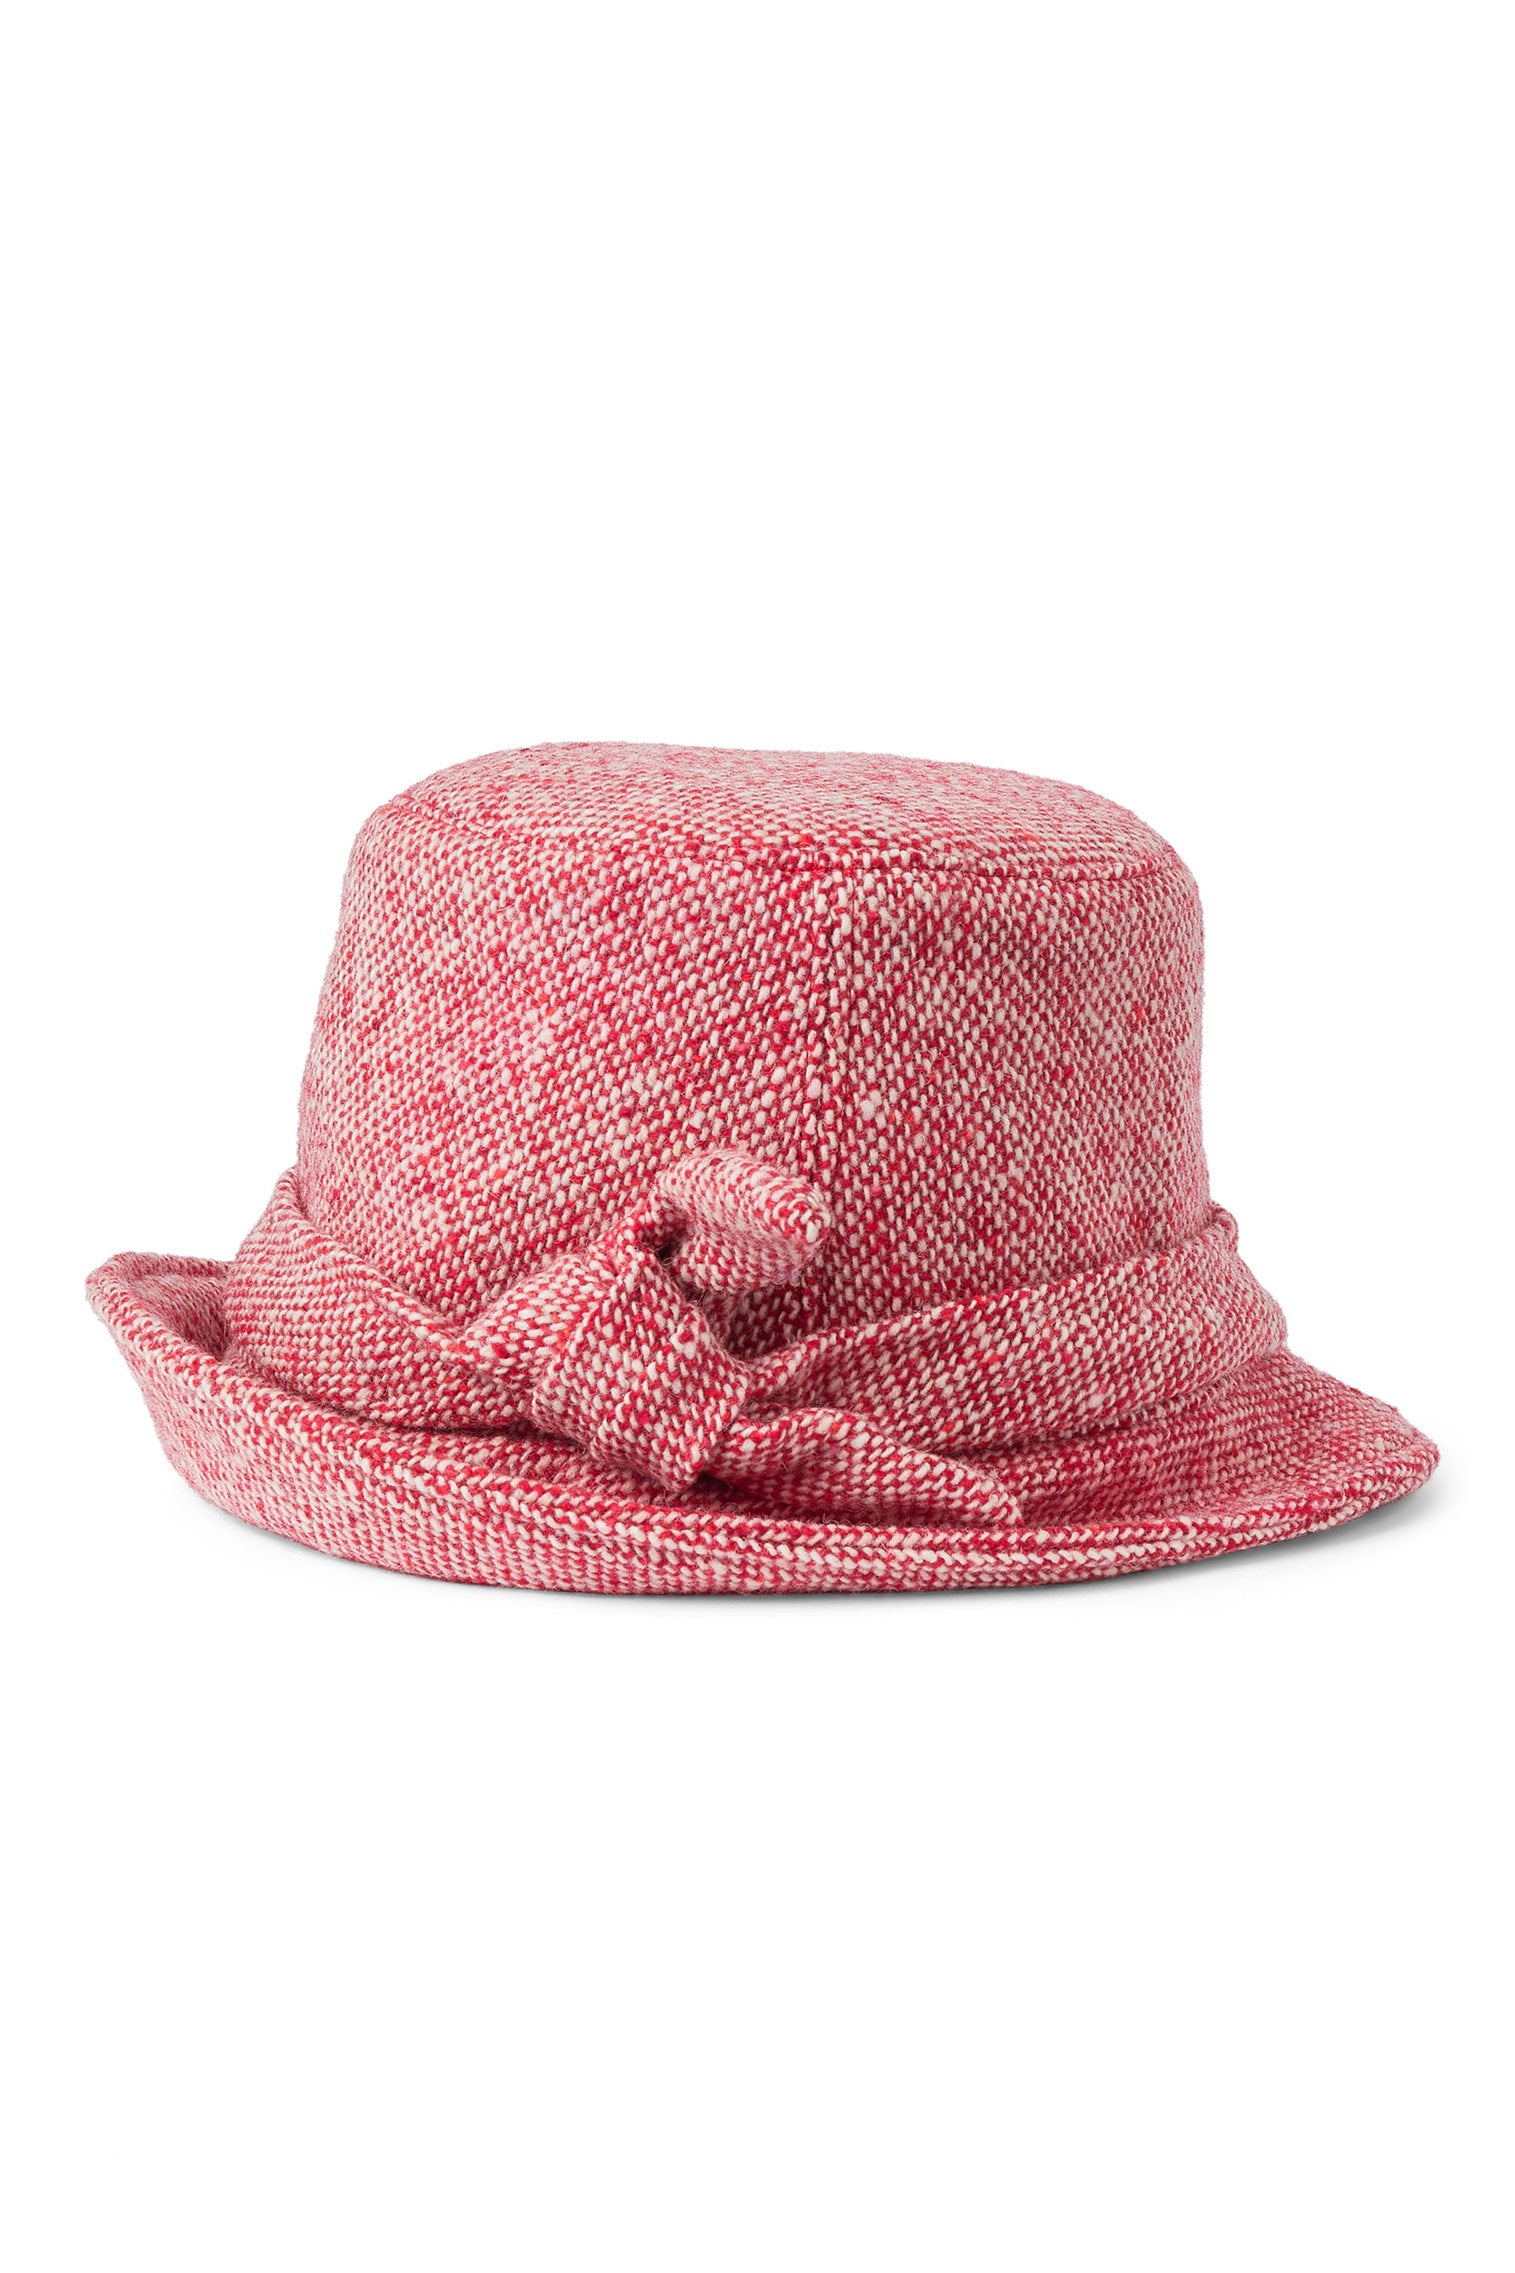 Dolores Red Cloche - New Season Hat Collection - Lock & Co. Hatters London UK